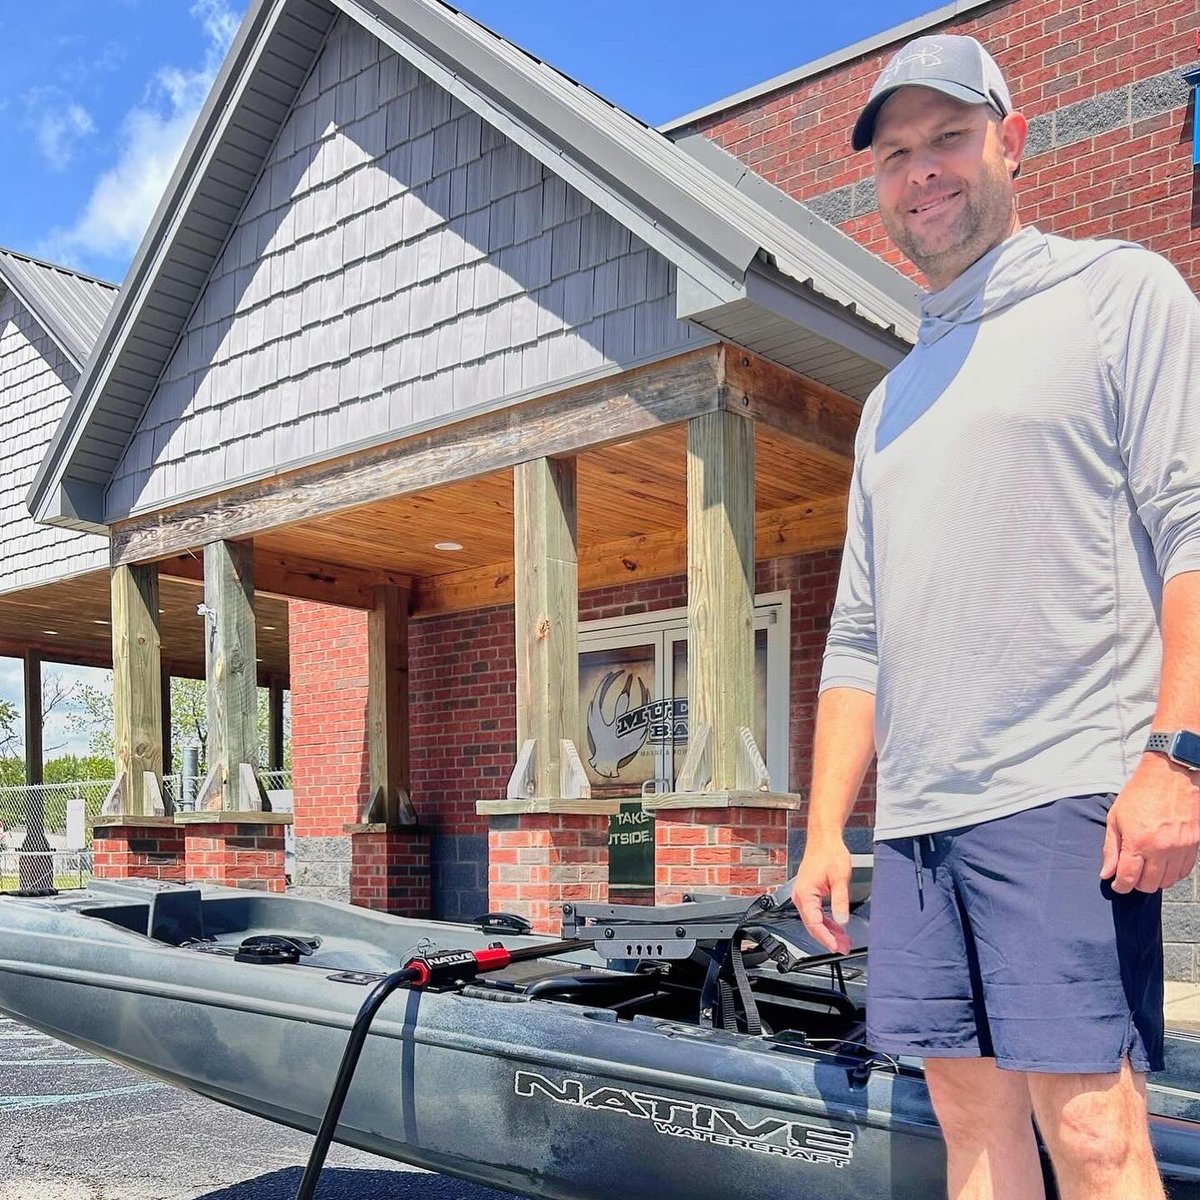 Nate Olive of Dalzell, SC with his new NATIVE WATERCRAFT® TITAN-X Propel 12.5 w/ the renowned Propel Pedal Drive. Add a a ringblade Rudder, 360 PivotPro swivel seating, & innovative electronic & motorization integrations, Nate is set with Ultimate Fishability. #LetsTakeItOutside